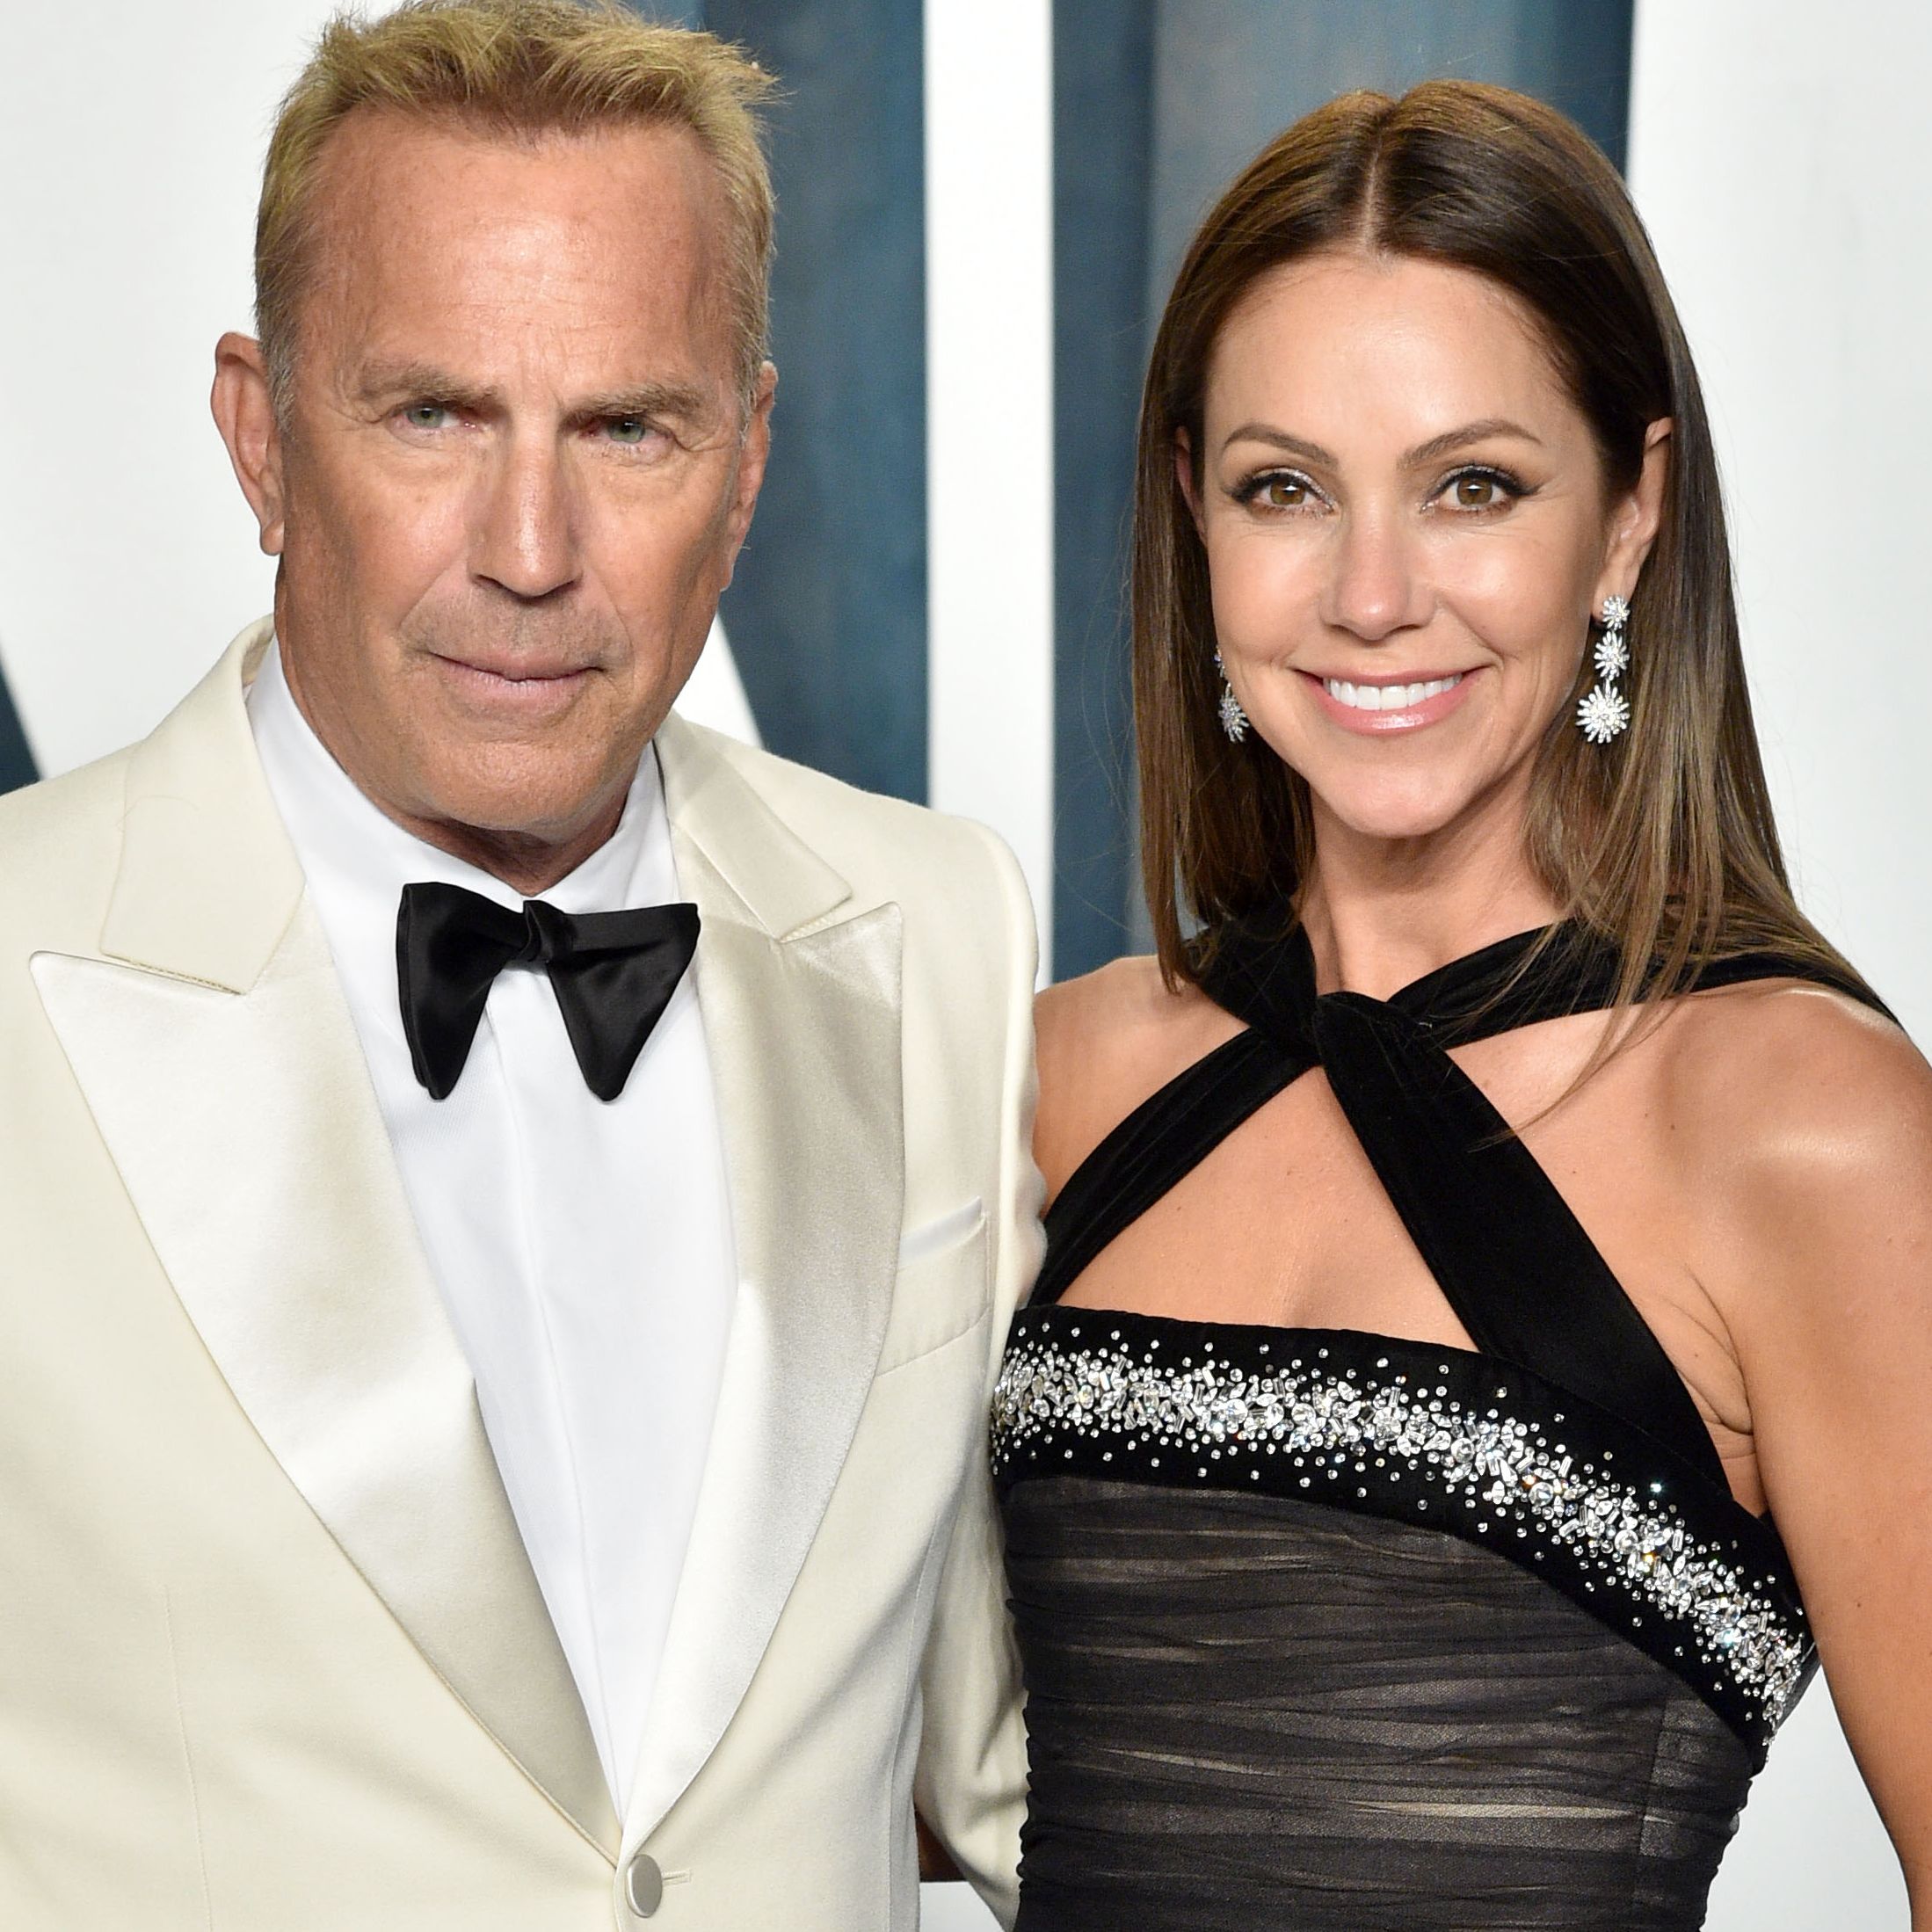 Kevin Costner On Why He Doesn't Want His Wife Or Kids To See 'Yellowstone' Season 5